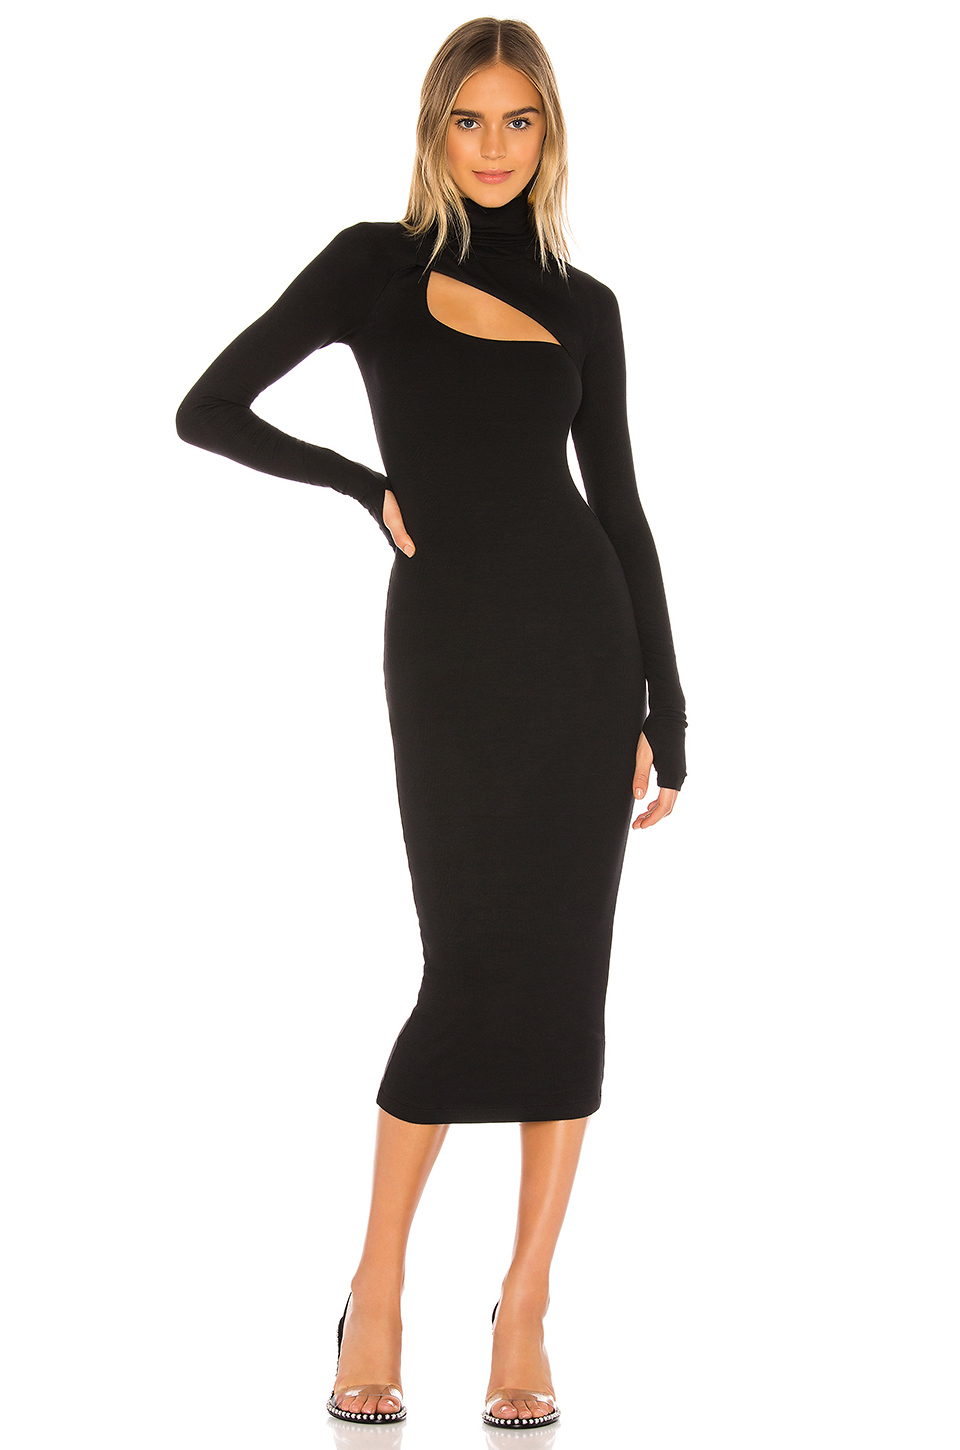 21 Cute Long-Sleeve Dresses to Keep You From Freezing | Who What Wear